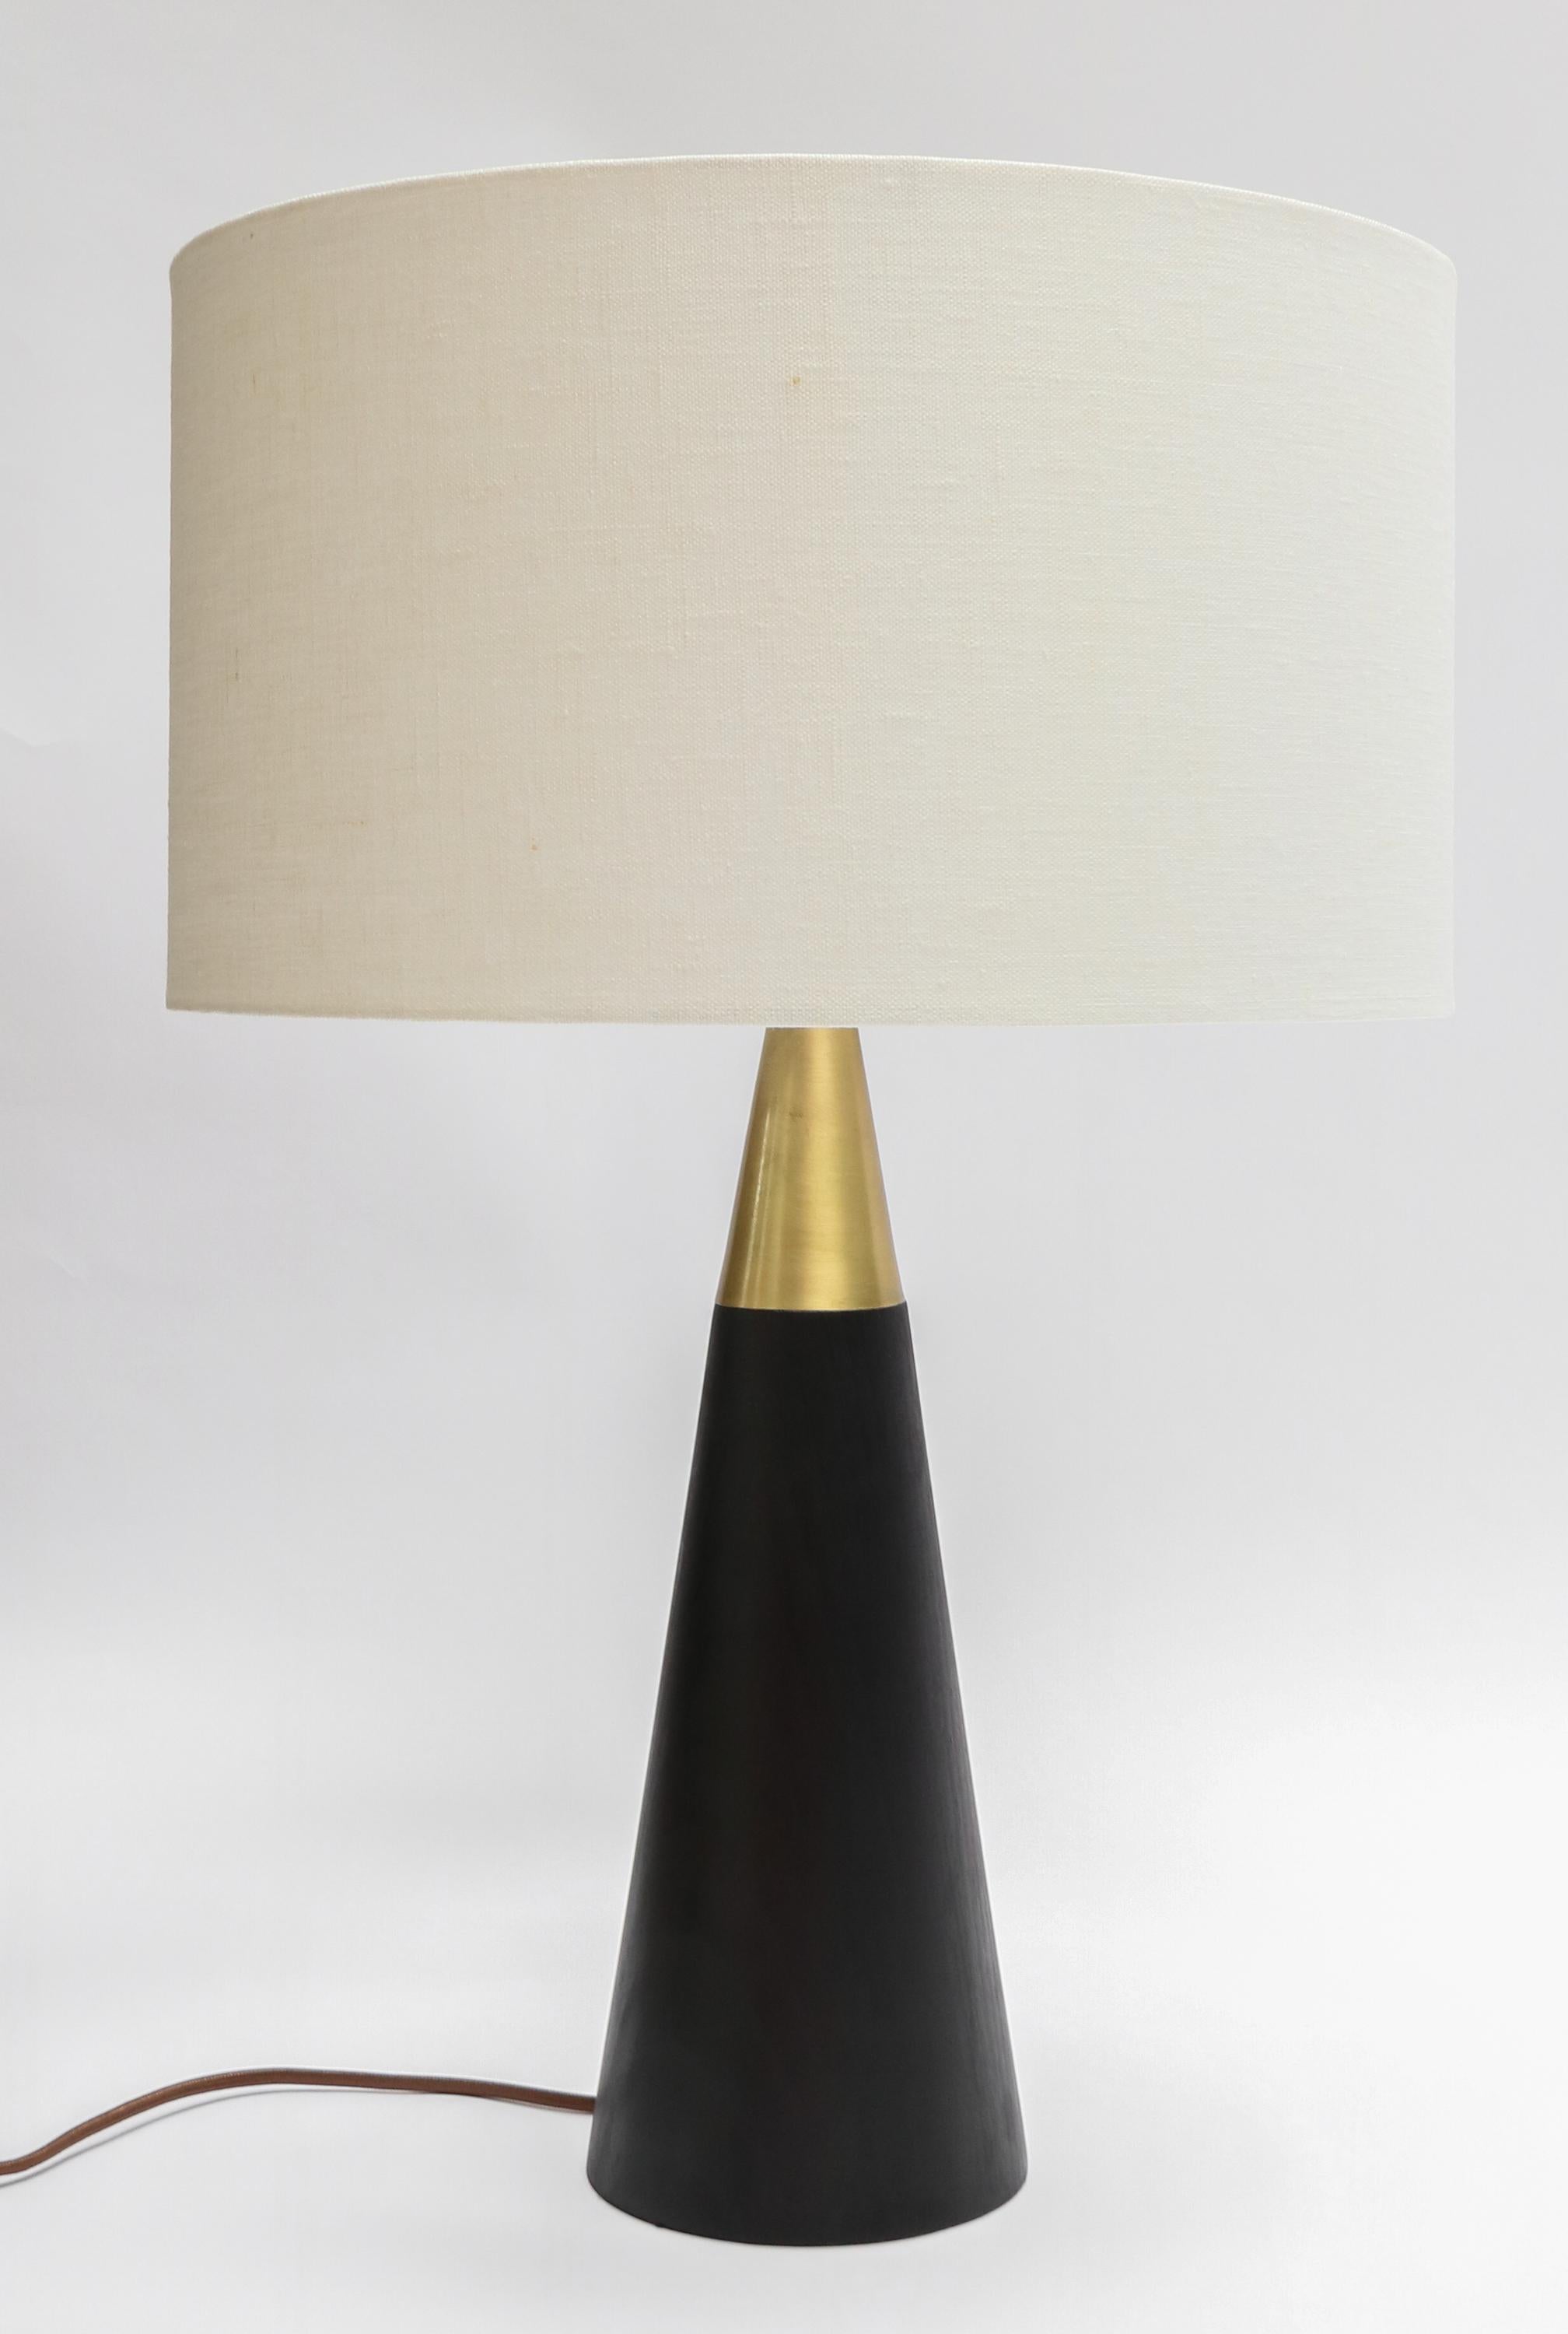 Custom table lamp with brass and black wood base with ivory linen shade by Adesso Imports.